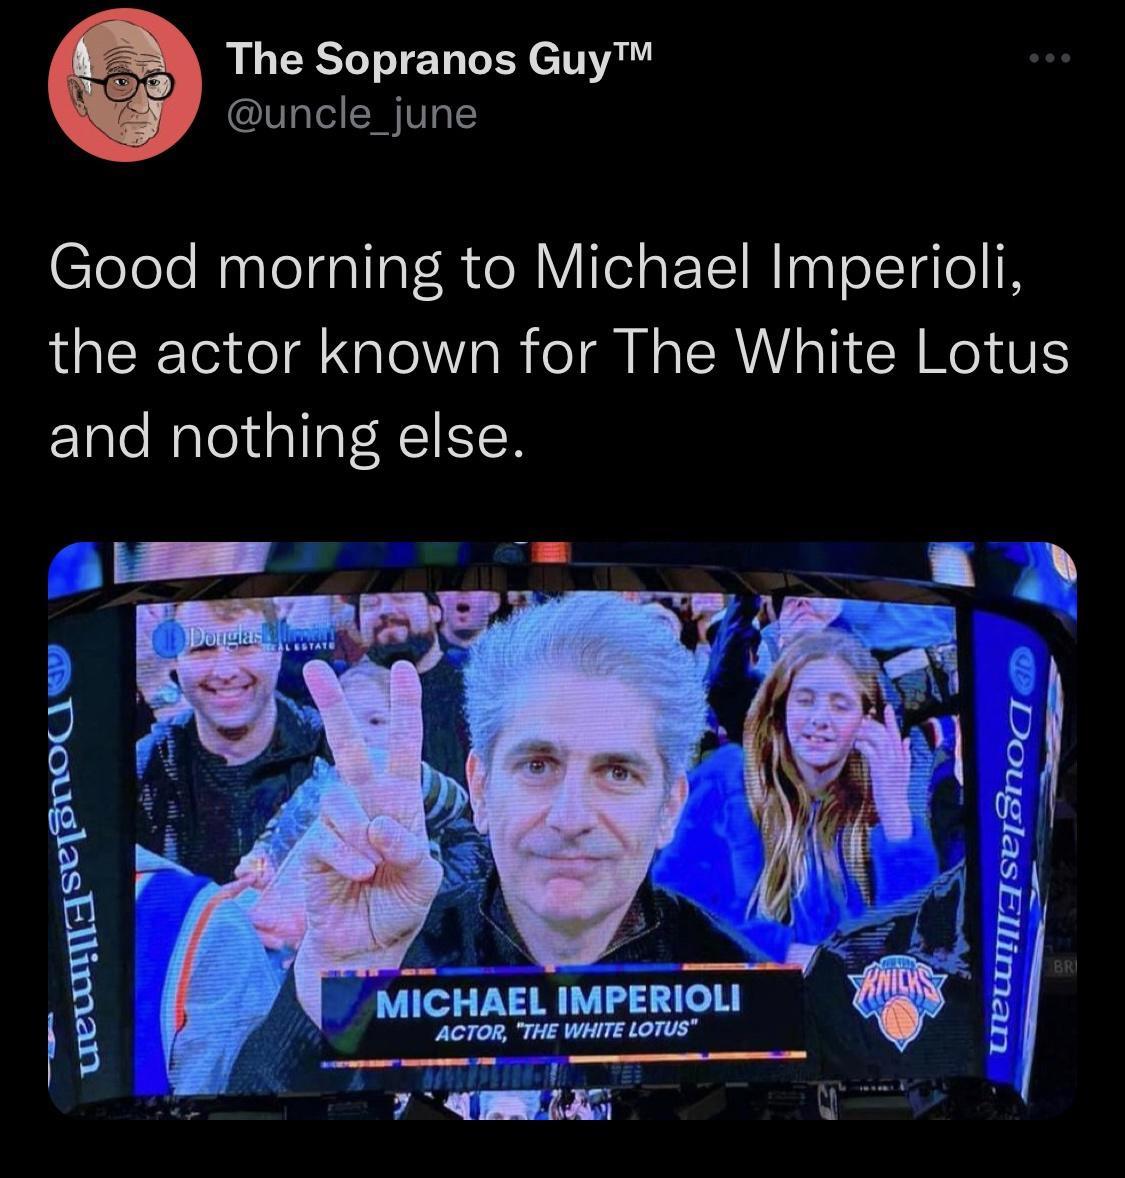 fresh memes - media - The Sopranos Guy Good morning to Michael Imperioli, the actor known for The White Lotus and nothing else. Douglas Elliman Donglash Michael Imperioli Actor, "The White Lotus" Douglas Elliman Bri